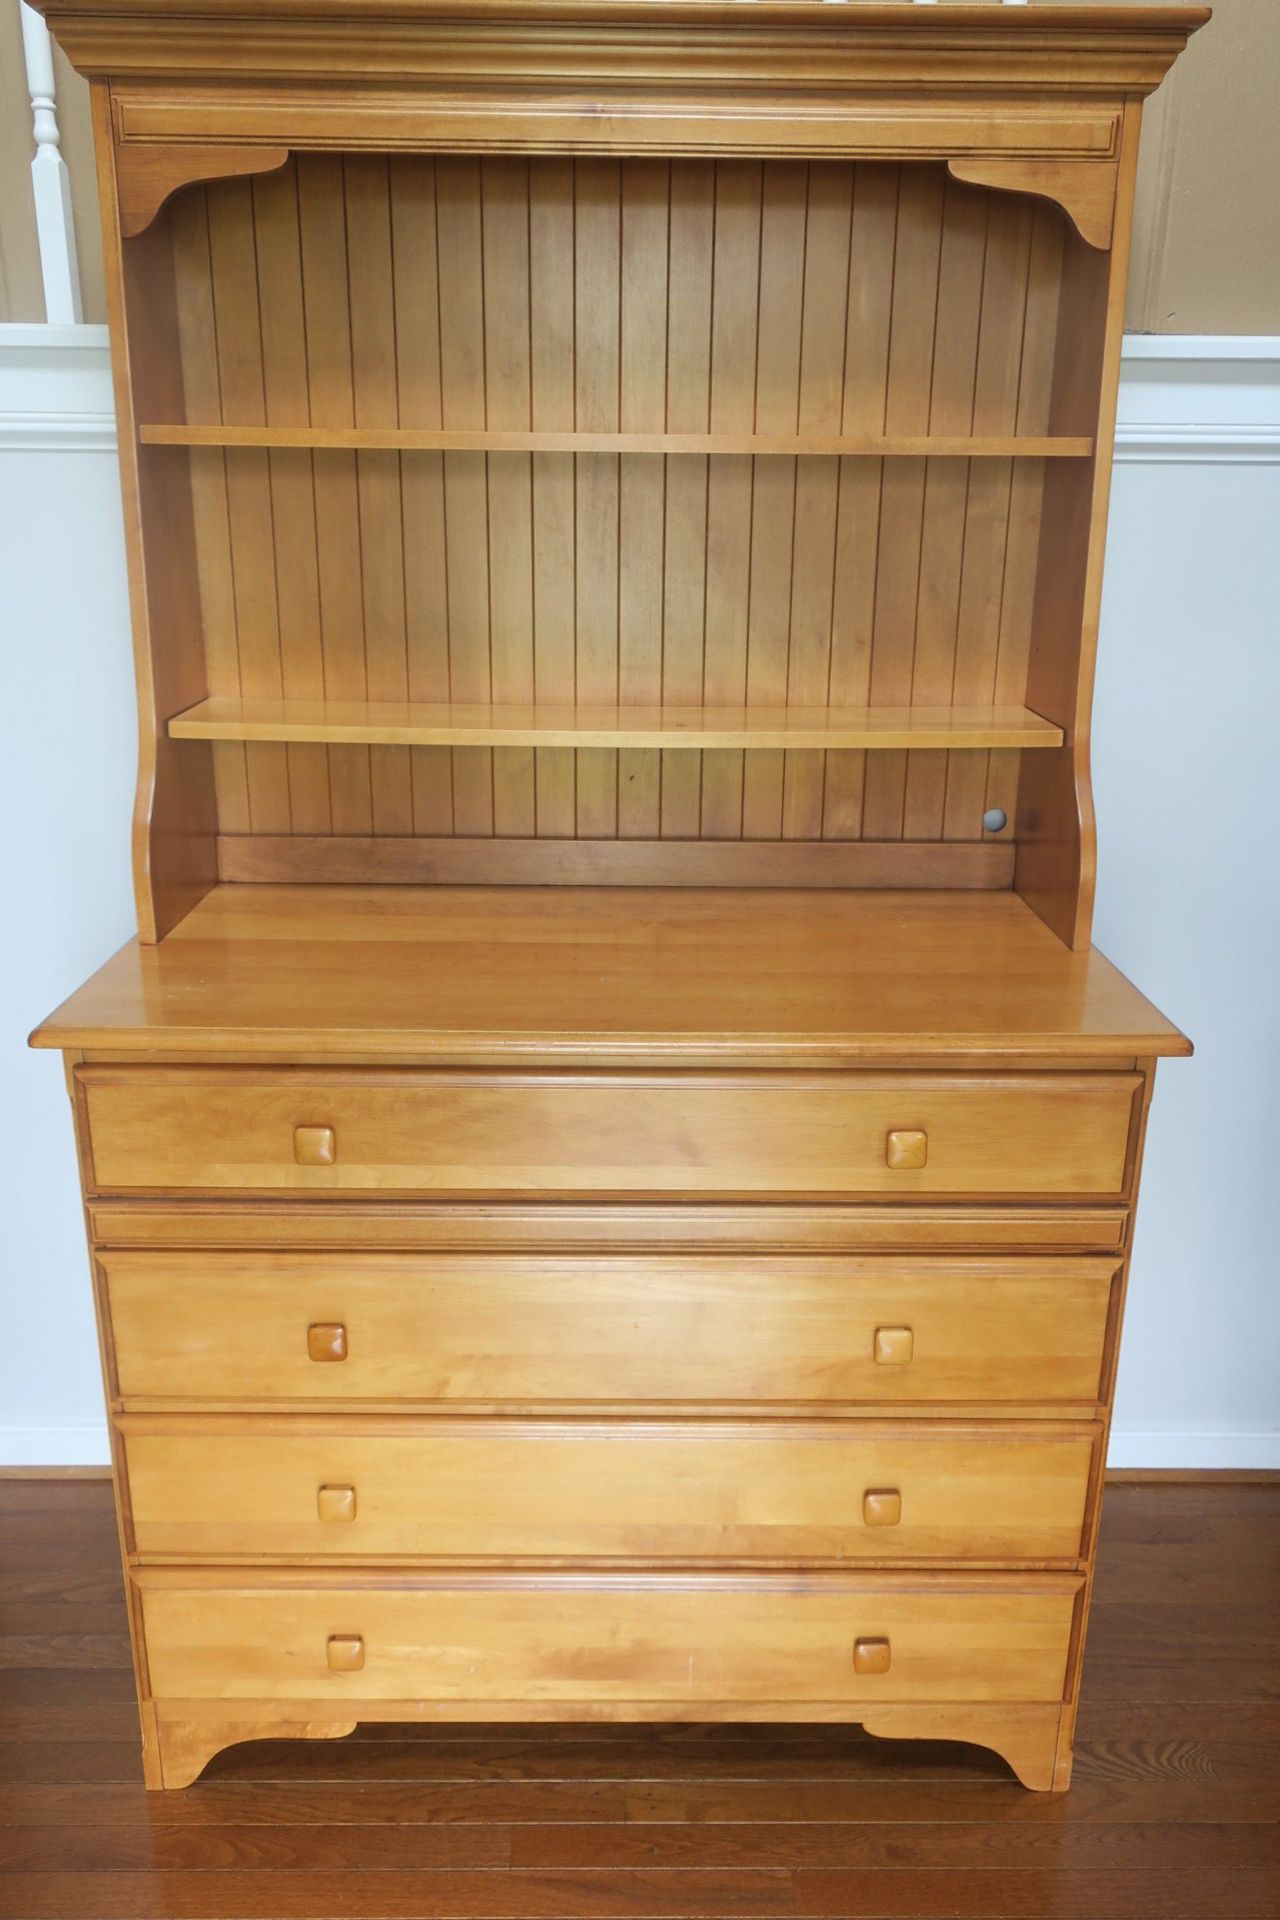 EXCELLENT Wood Dresser and Hutch!